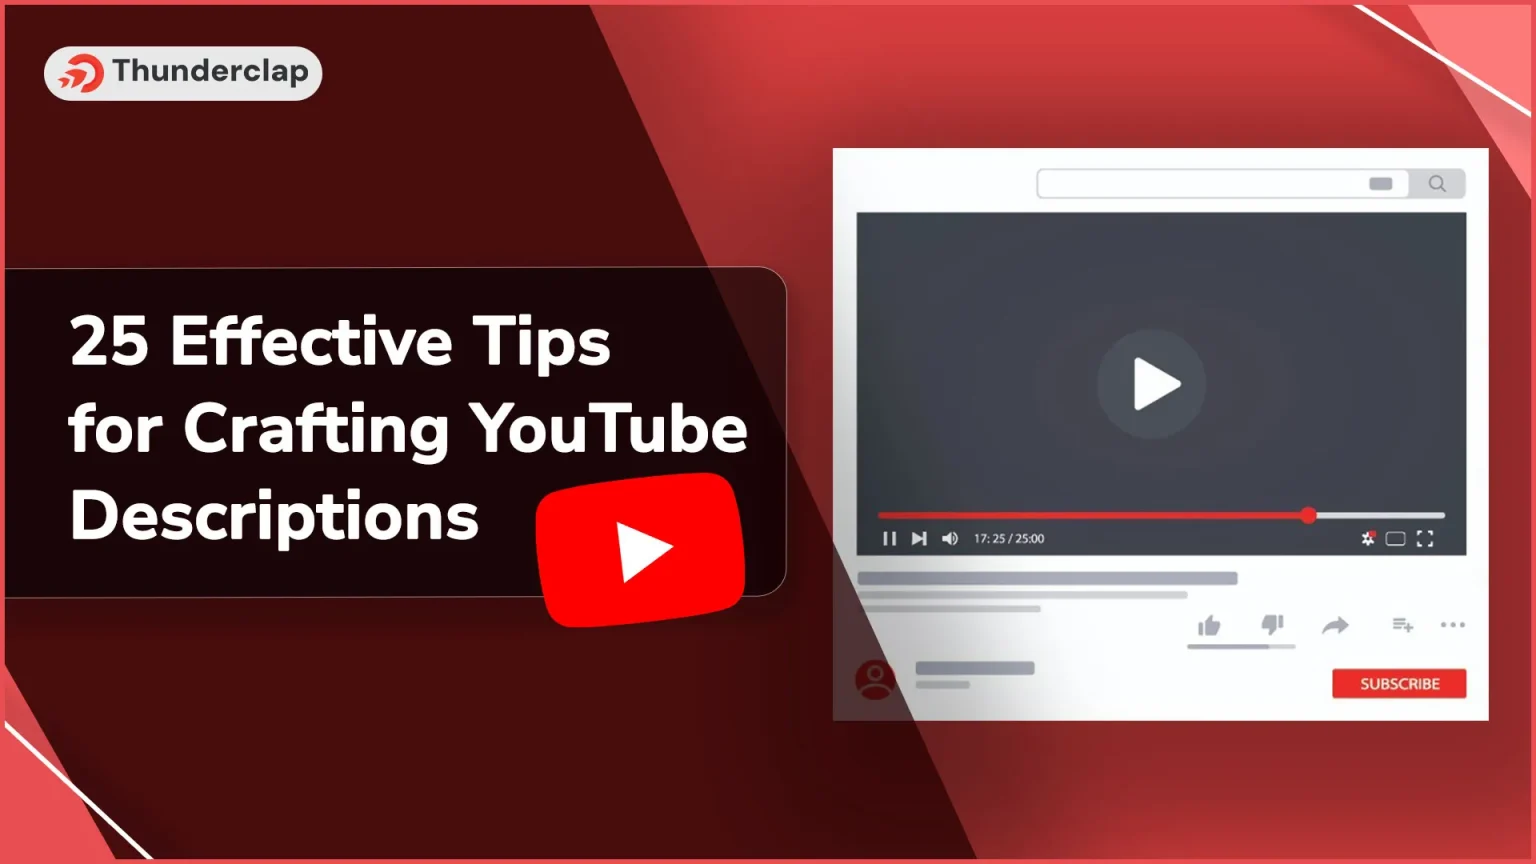 25 Effective Tips for Crafting YouTube Descriptions